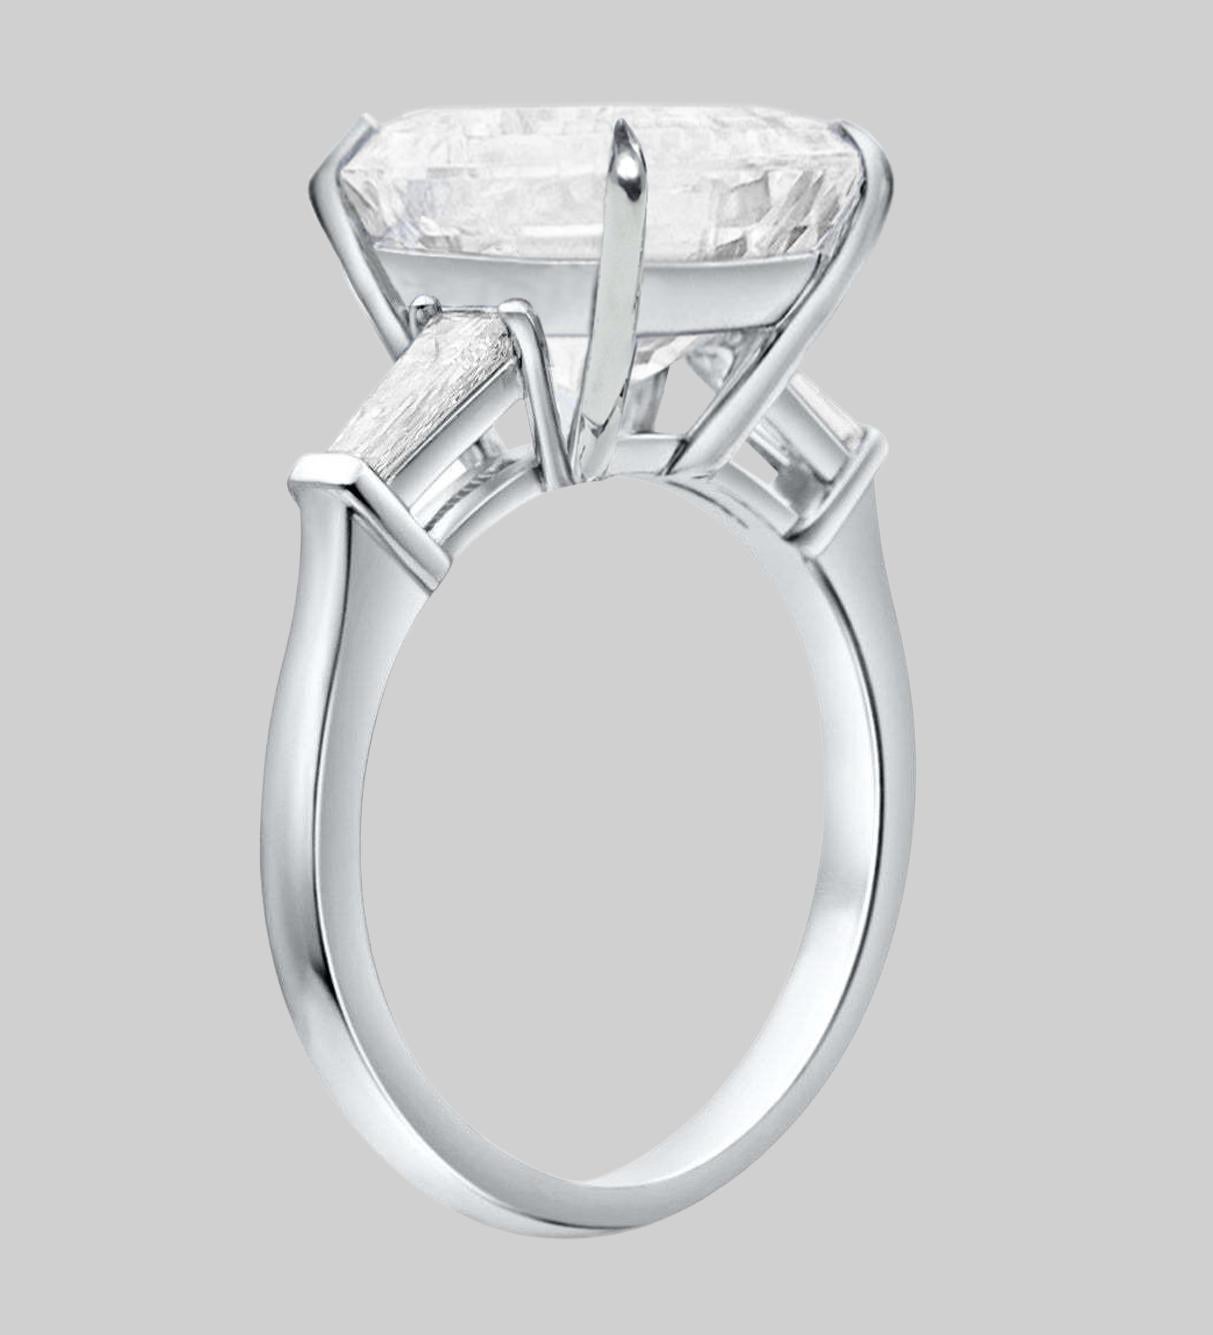 GIA Certified 5 Carat Oval Diamond Platinum Ring.
The Ring is made in 18 carats white gold with a beautiful Oval Diamond.
The main Diamond has classified  by the GIA with Internally VS2 in Clarity and F in Color.
